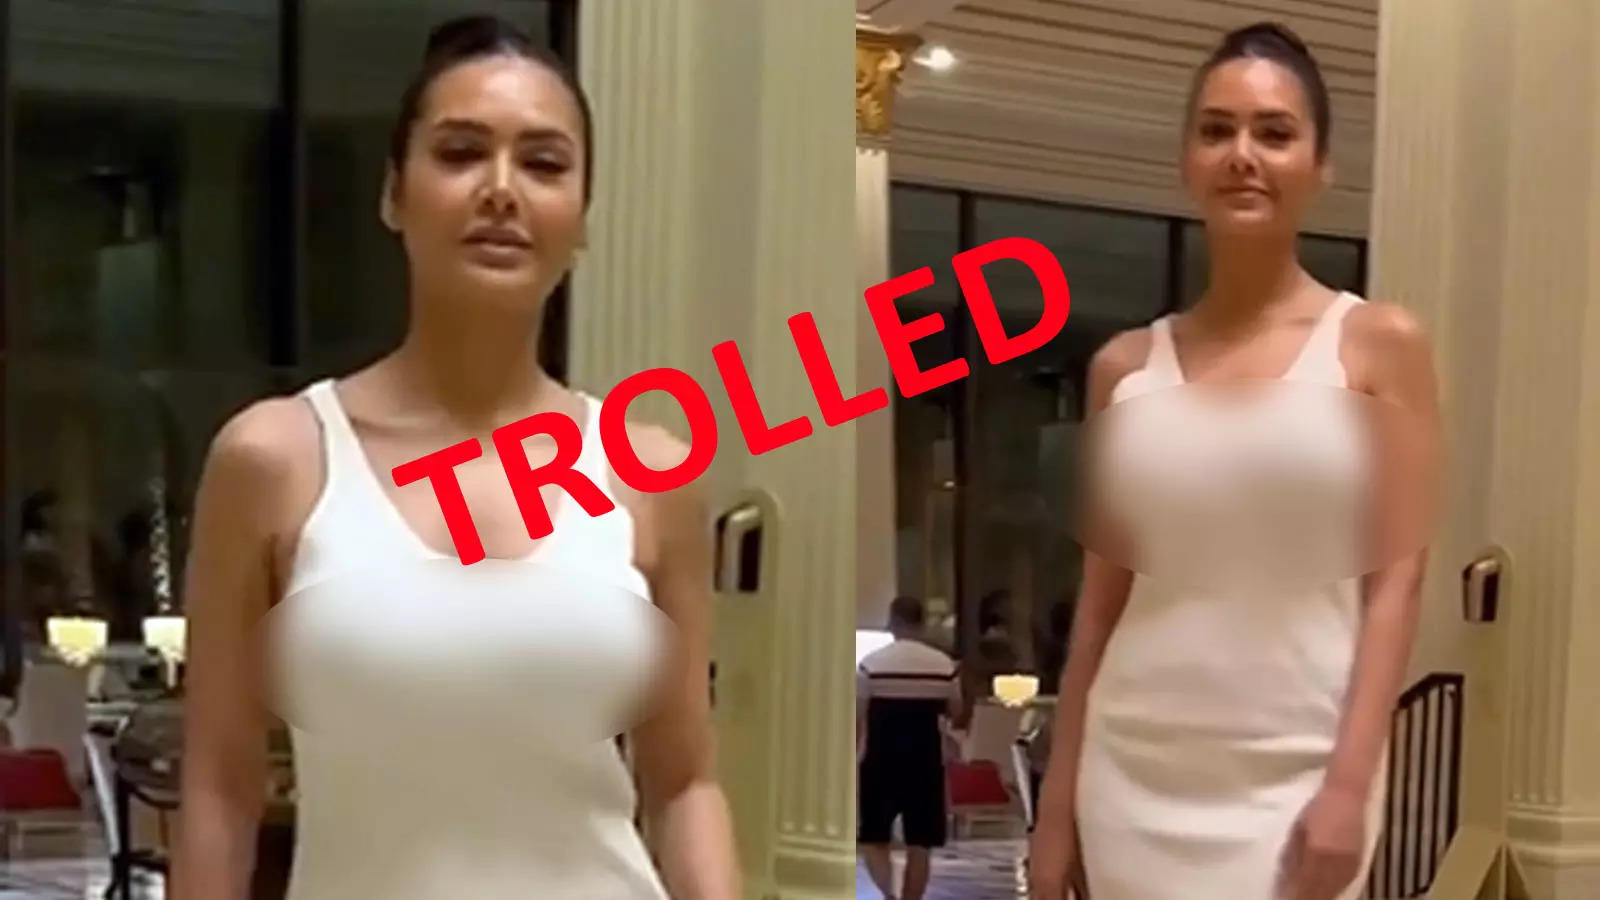 christine khaw recommends braless in public videos pic